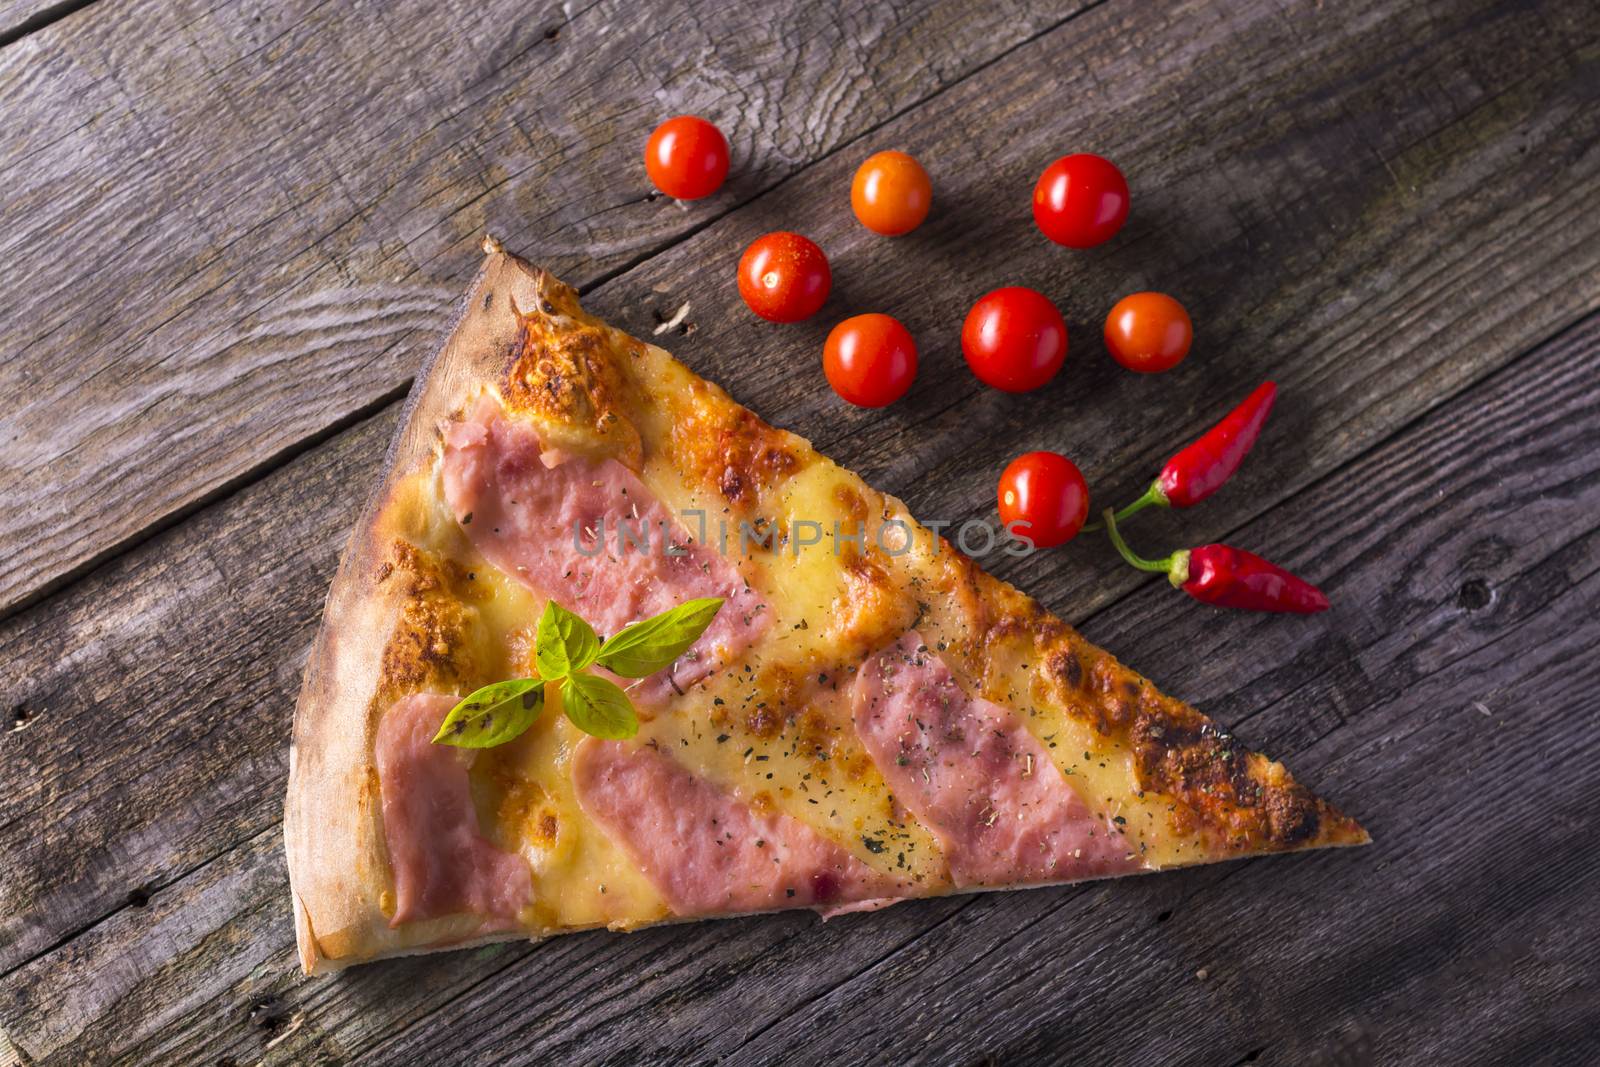 Piece of hot pizza on wooden table, cherry tomato and hot pepper by adamr